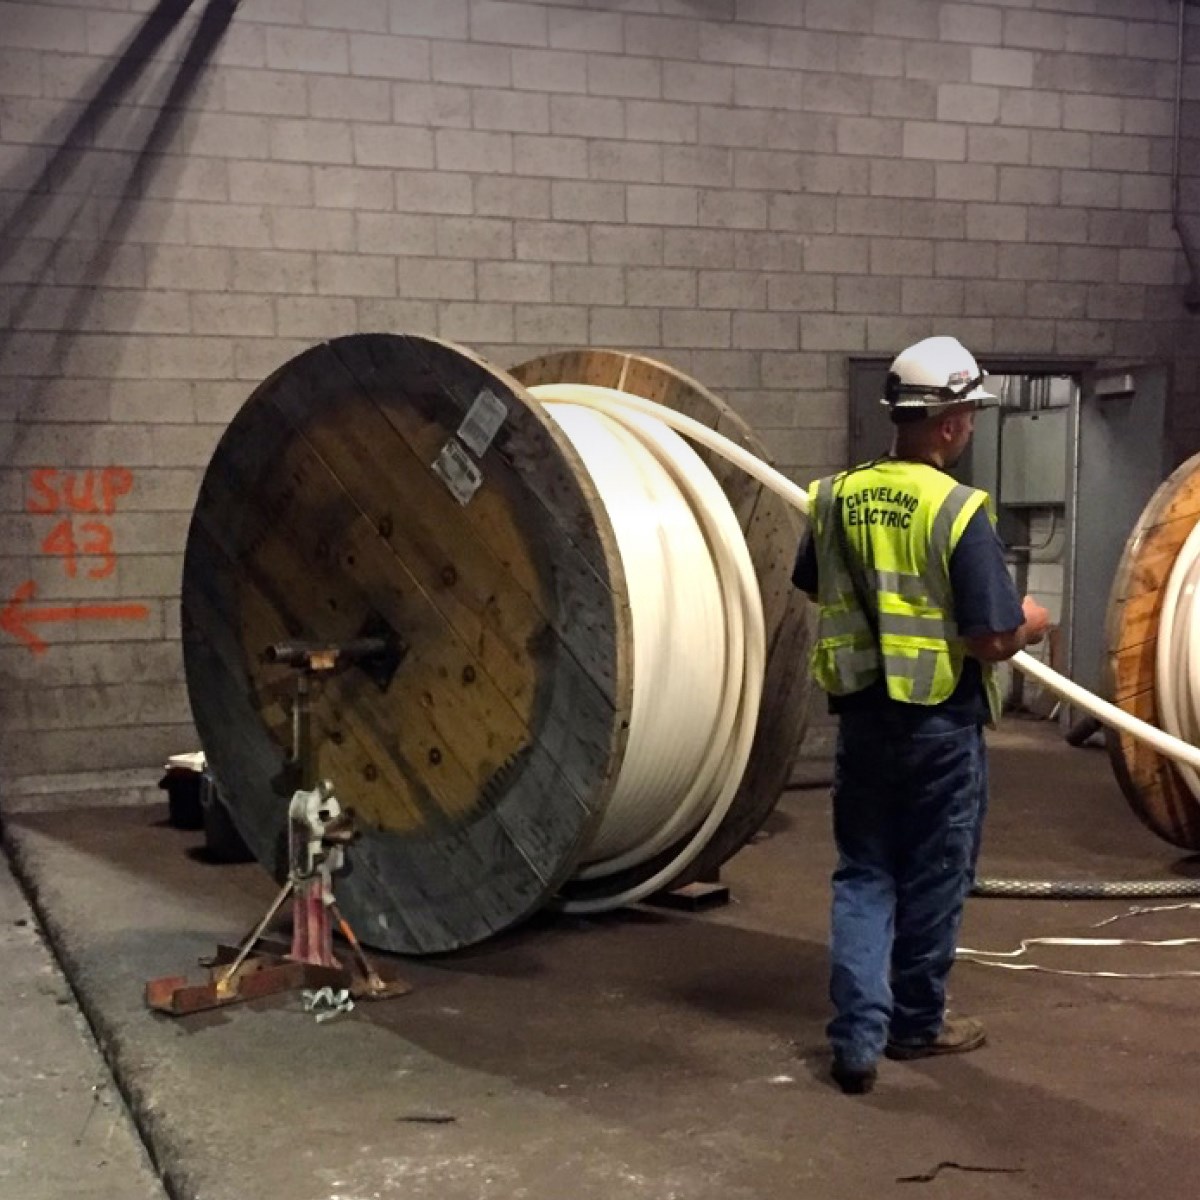 Conduit installation in confined spaces